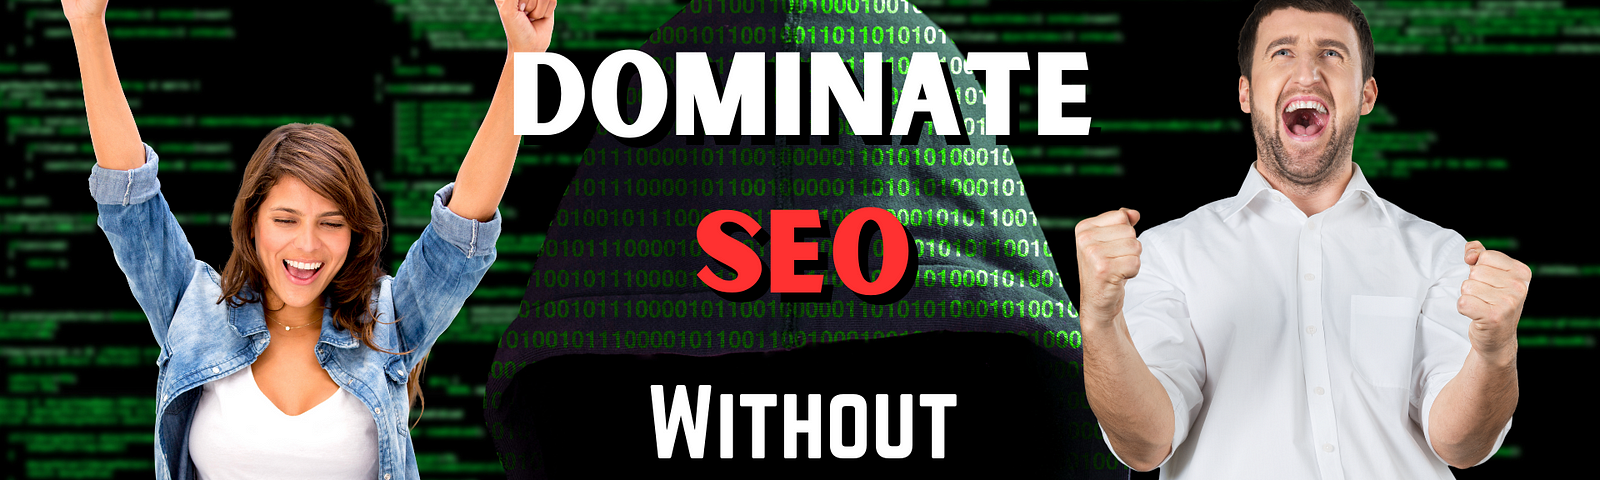 Learn How To Dominate SEO Page One With Or Without A Blog Through Writing